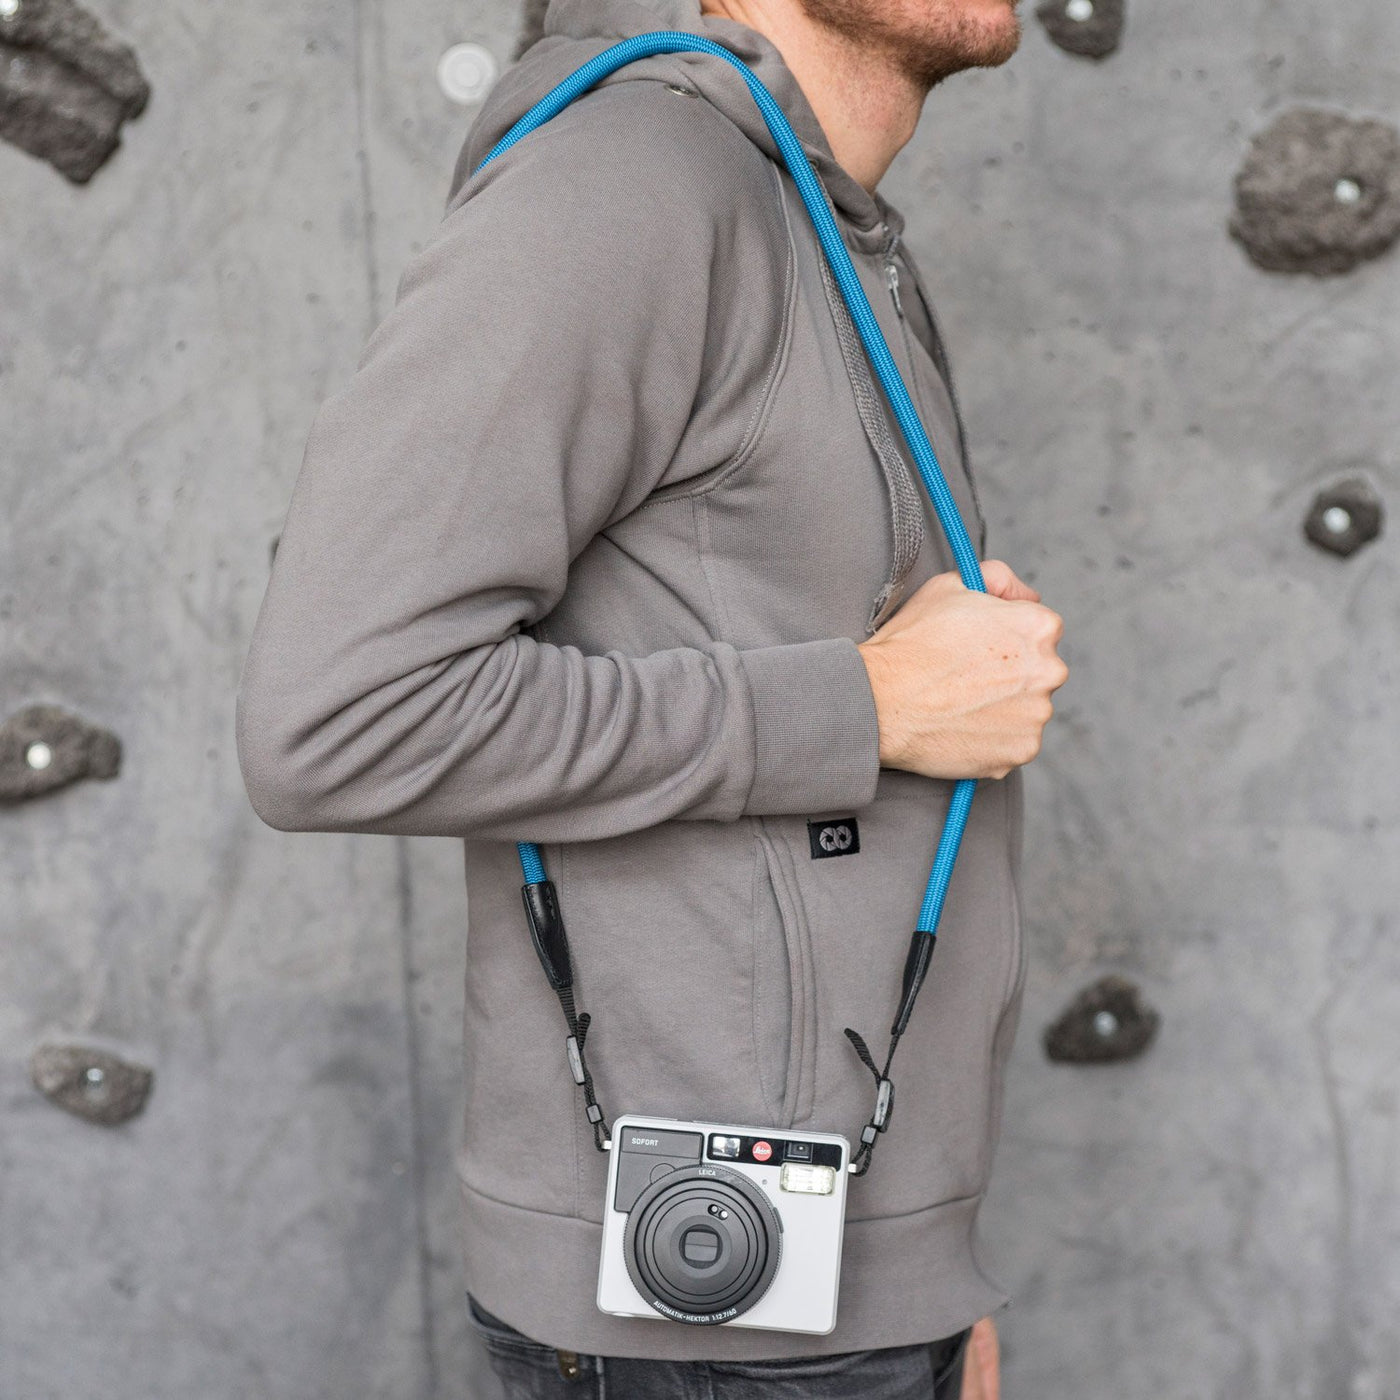 Leica camera on a photographer's hip held with blue rope 